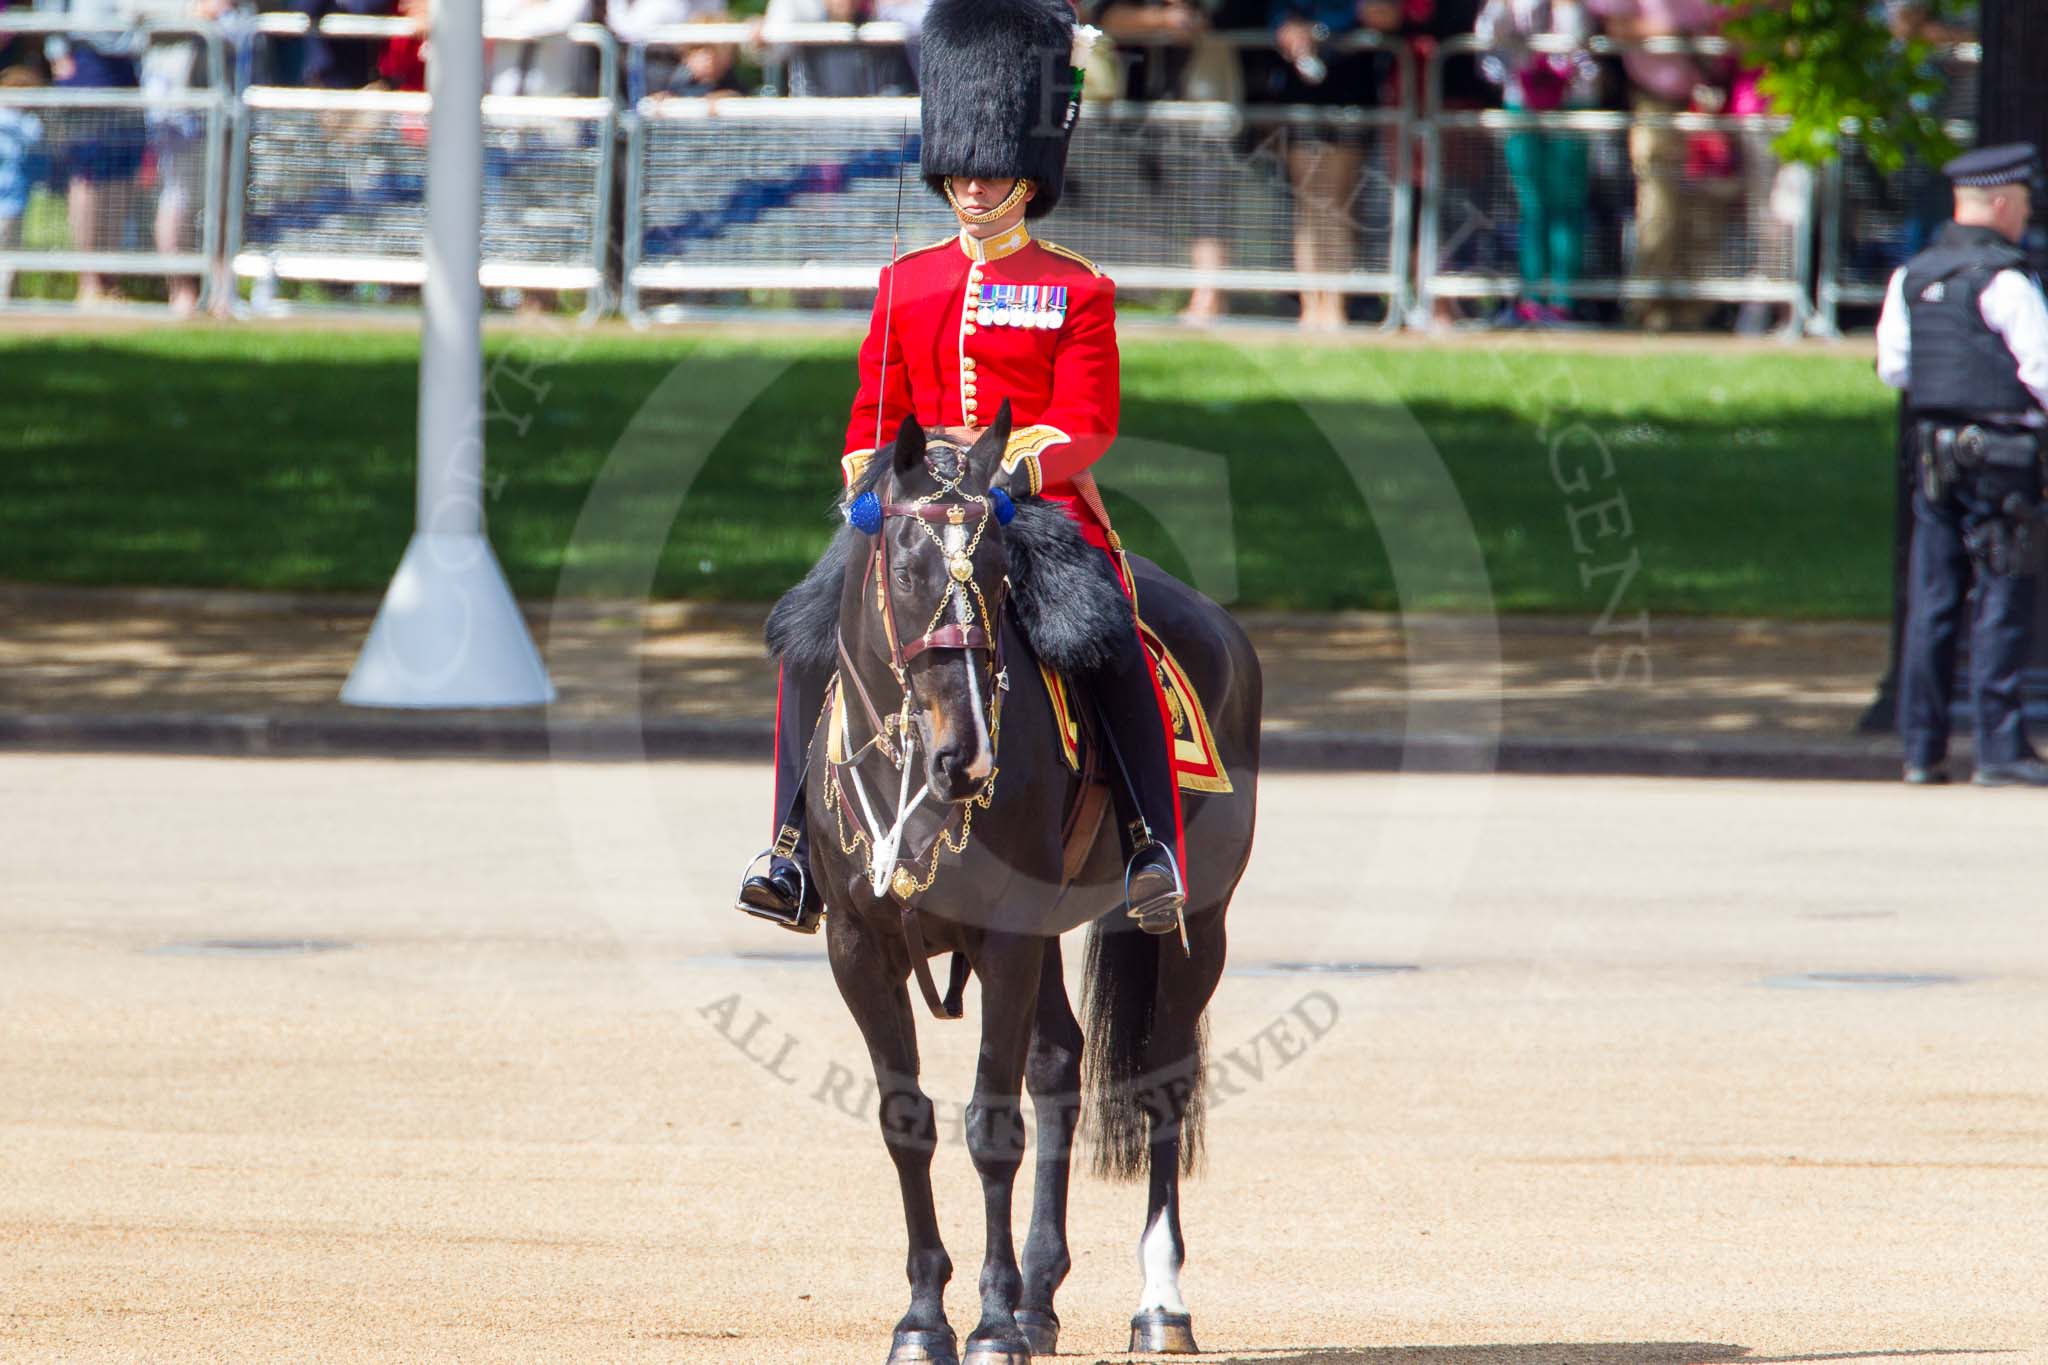 The Colonel's Review 2013: The Major of the Parade, Major H G C Bettinson, Welsh Guards..
Horse Guards Parade, Westminster,
London SW1,

United Kingdom,
on 08 June 2013 at 10:42, image #199